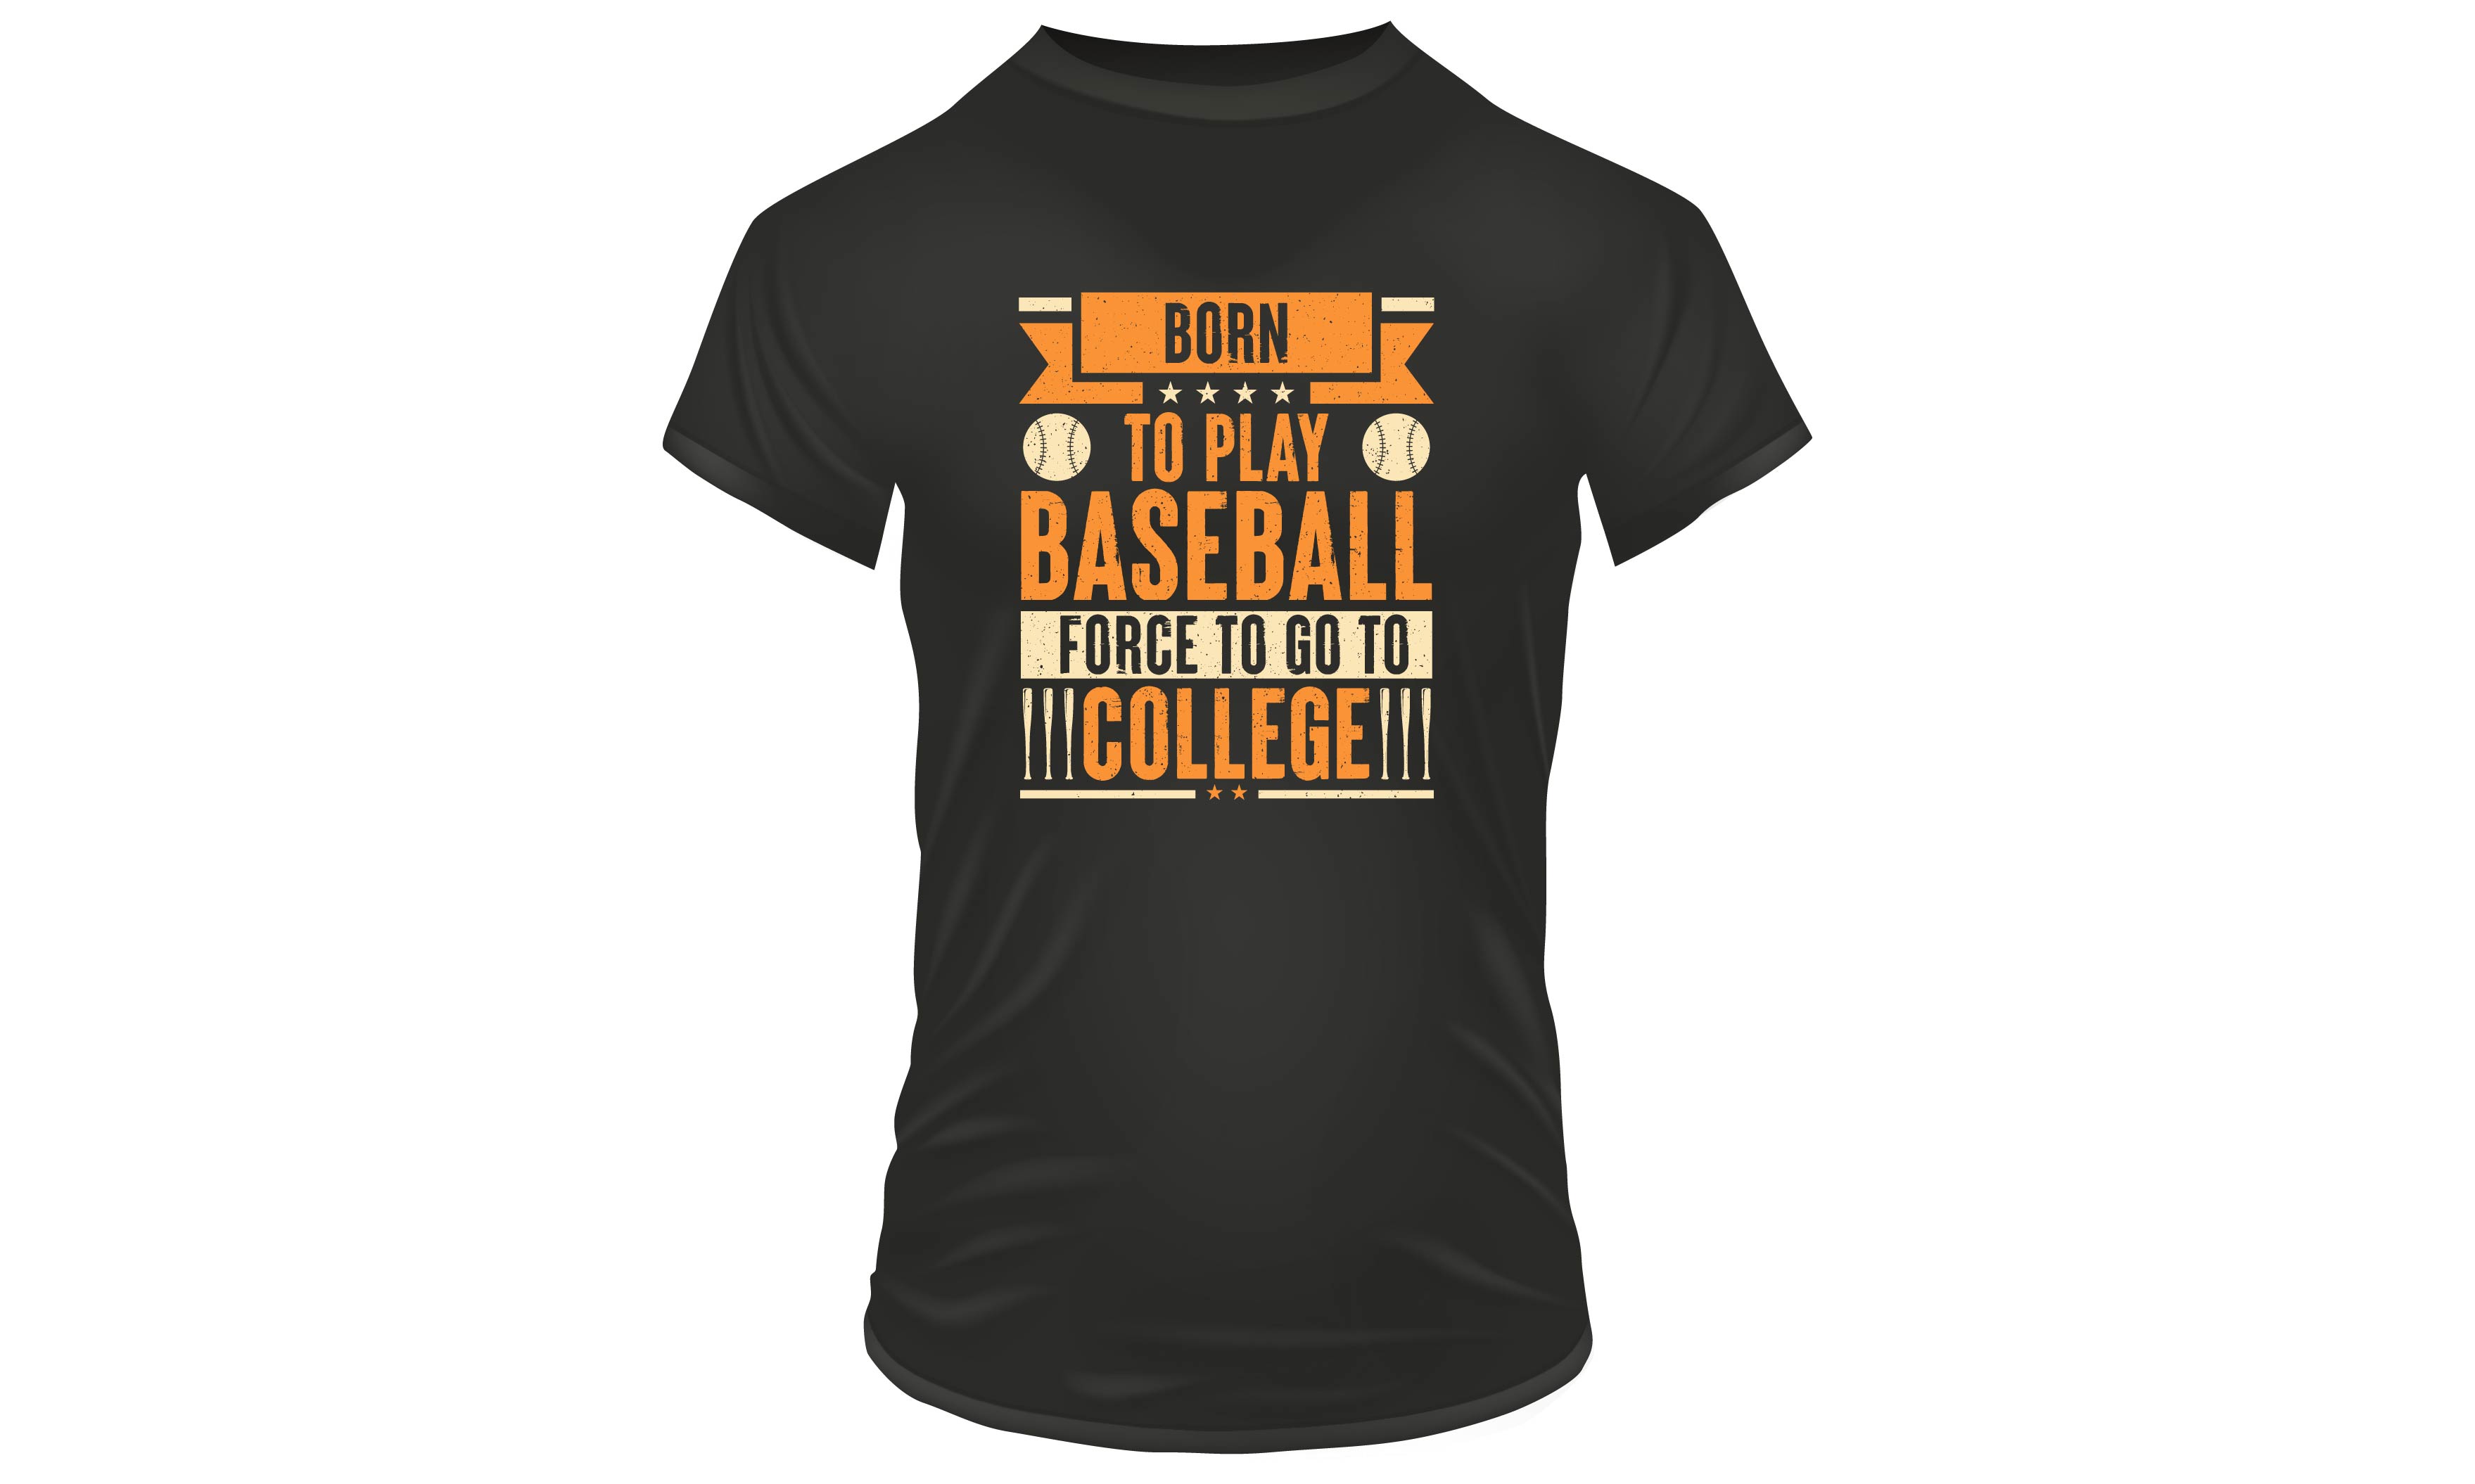 Black t - shirt with a baseball quote on it.